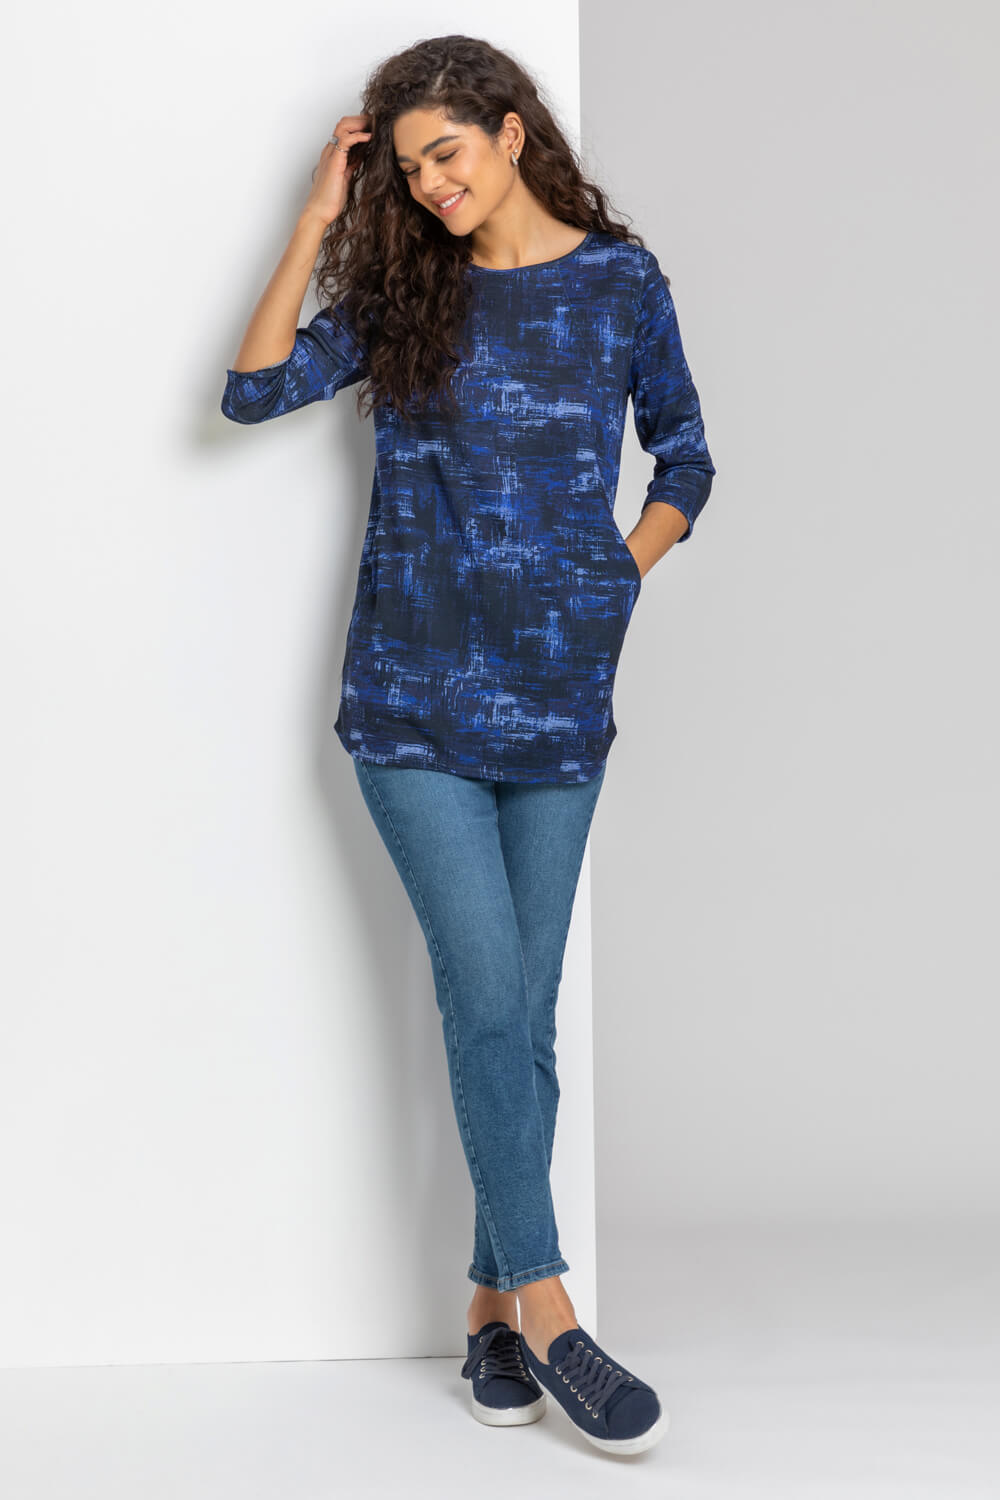 Midnight Blue Abstract Print Pocket Tunic Top, Image 3 of 5